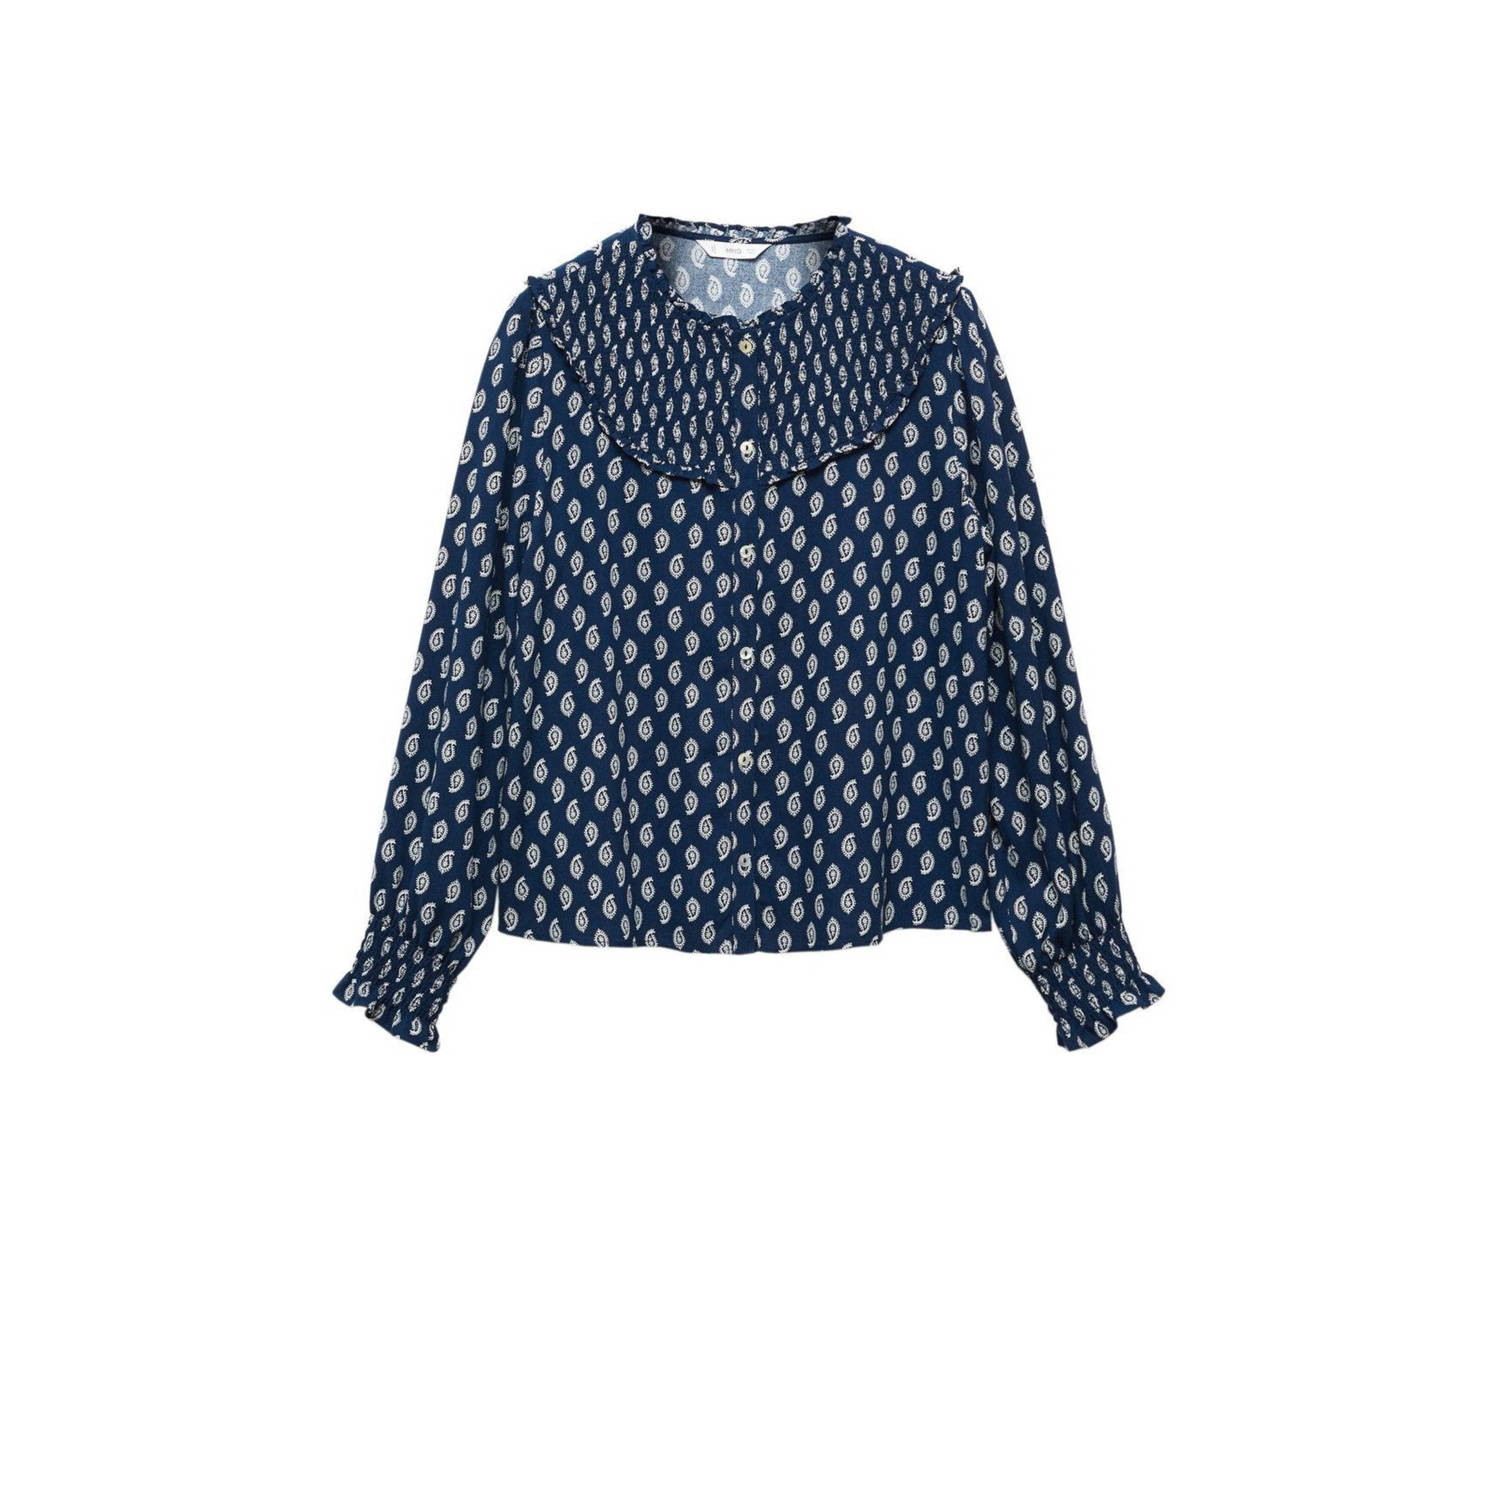 Mango Kids blouse met all over print donkerblauw wit